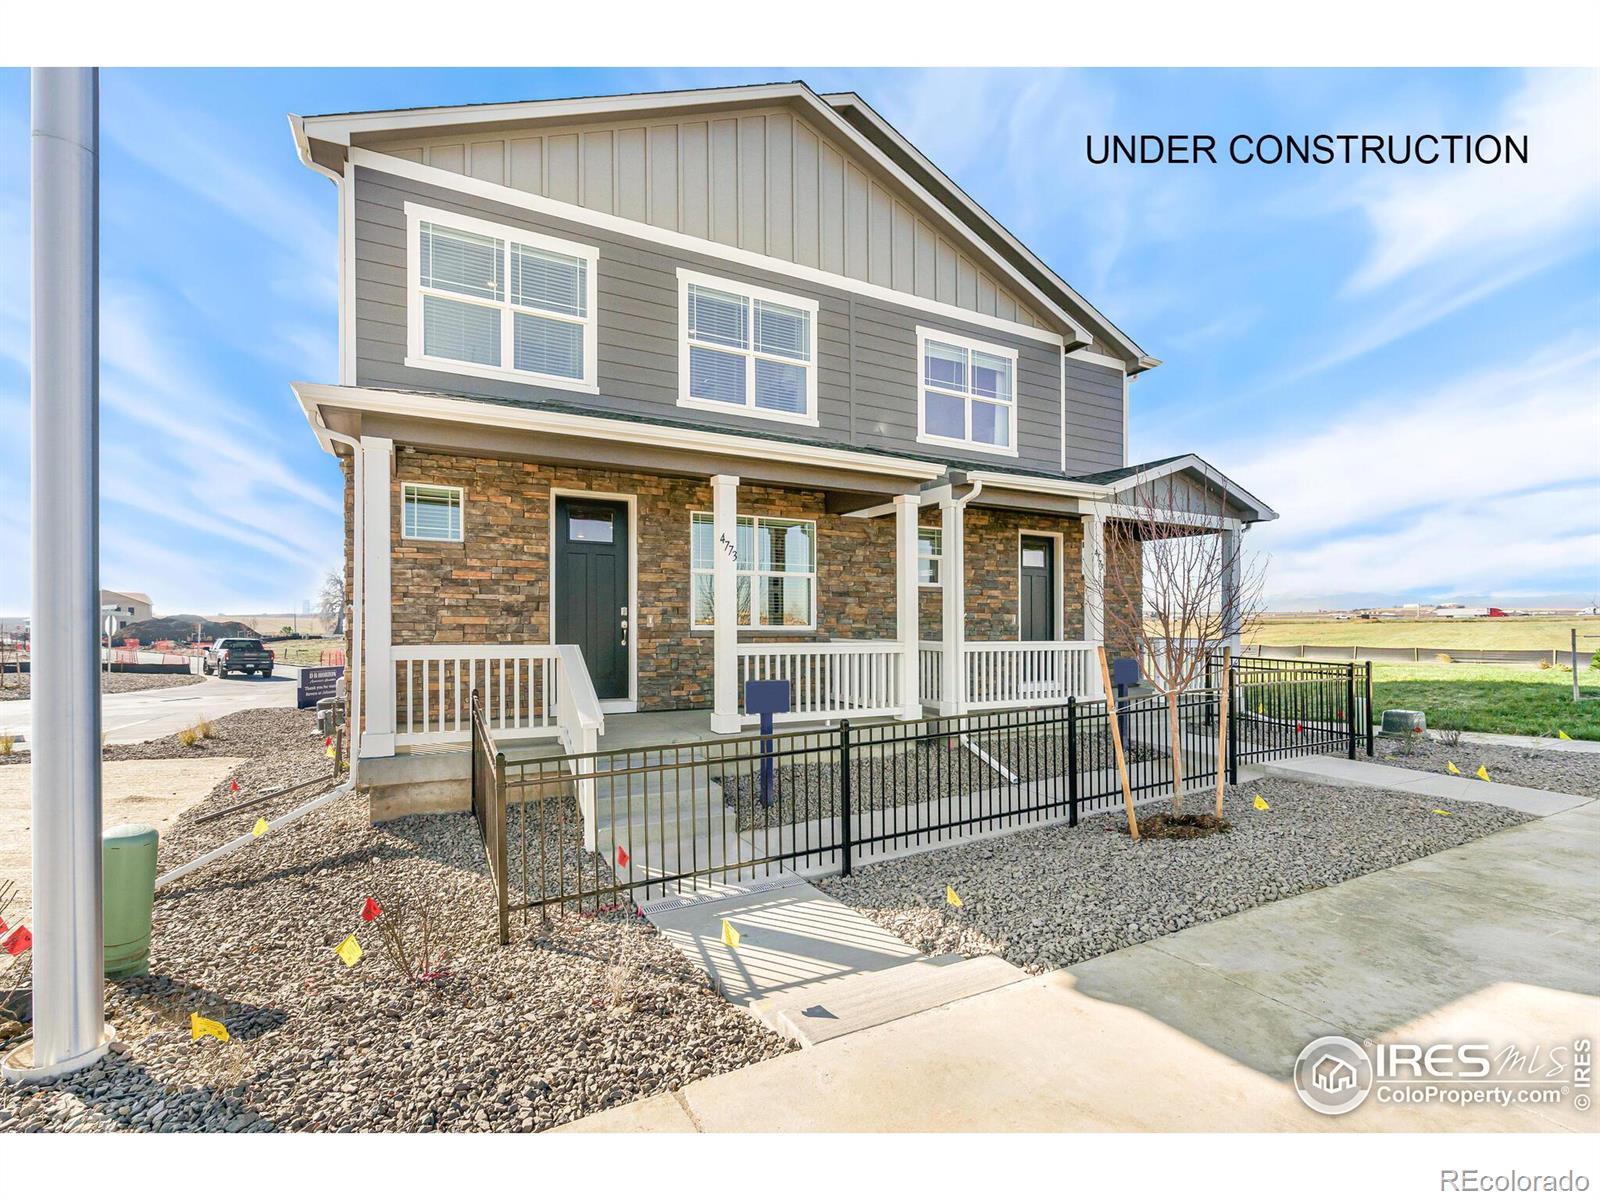 Report Image for 604  Thoroughbred Lane,Johnstown, Colorado